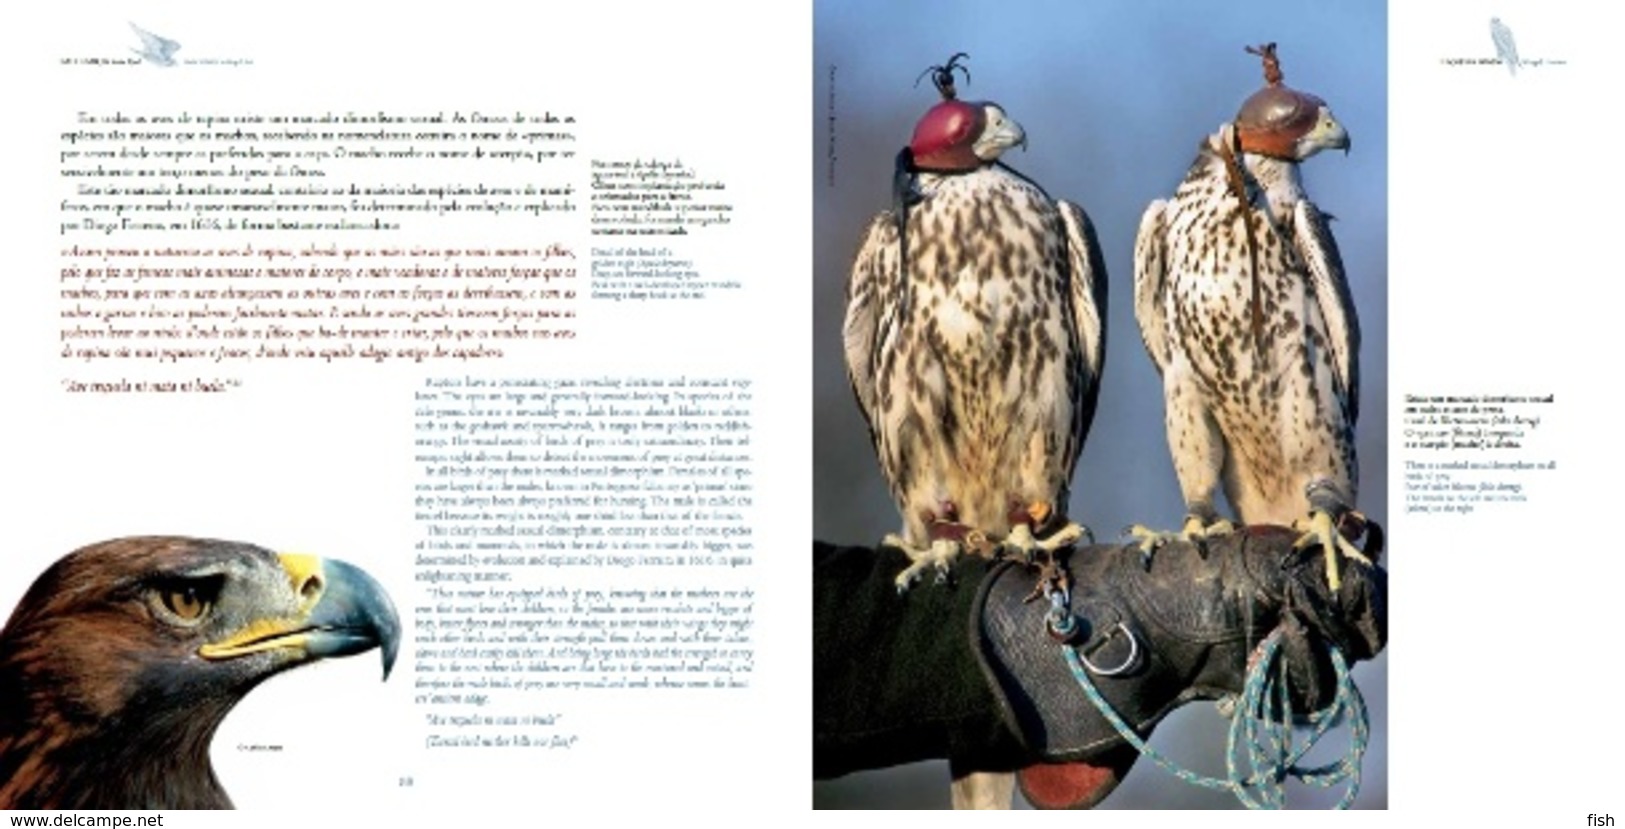 Portugal ** & CTT, Thematic Book With Stamps, Falconry Real Art 2013 (86423) - Book Of The Year